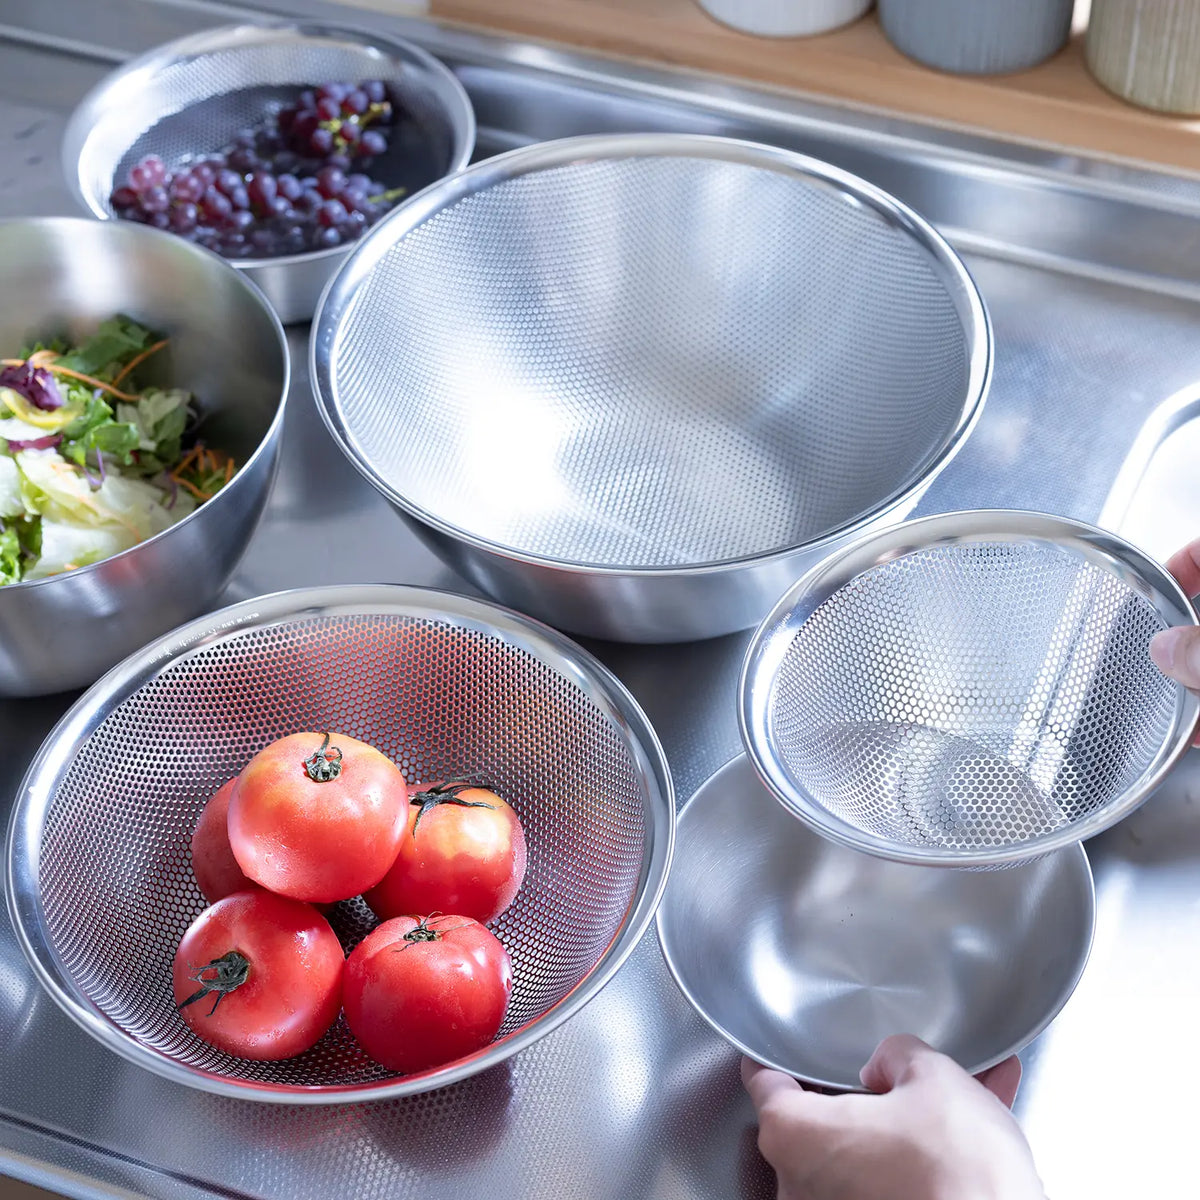 Stainless Steel Mixing Bowls With Lids, Salad Mixing Bowls Set